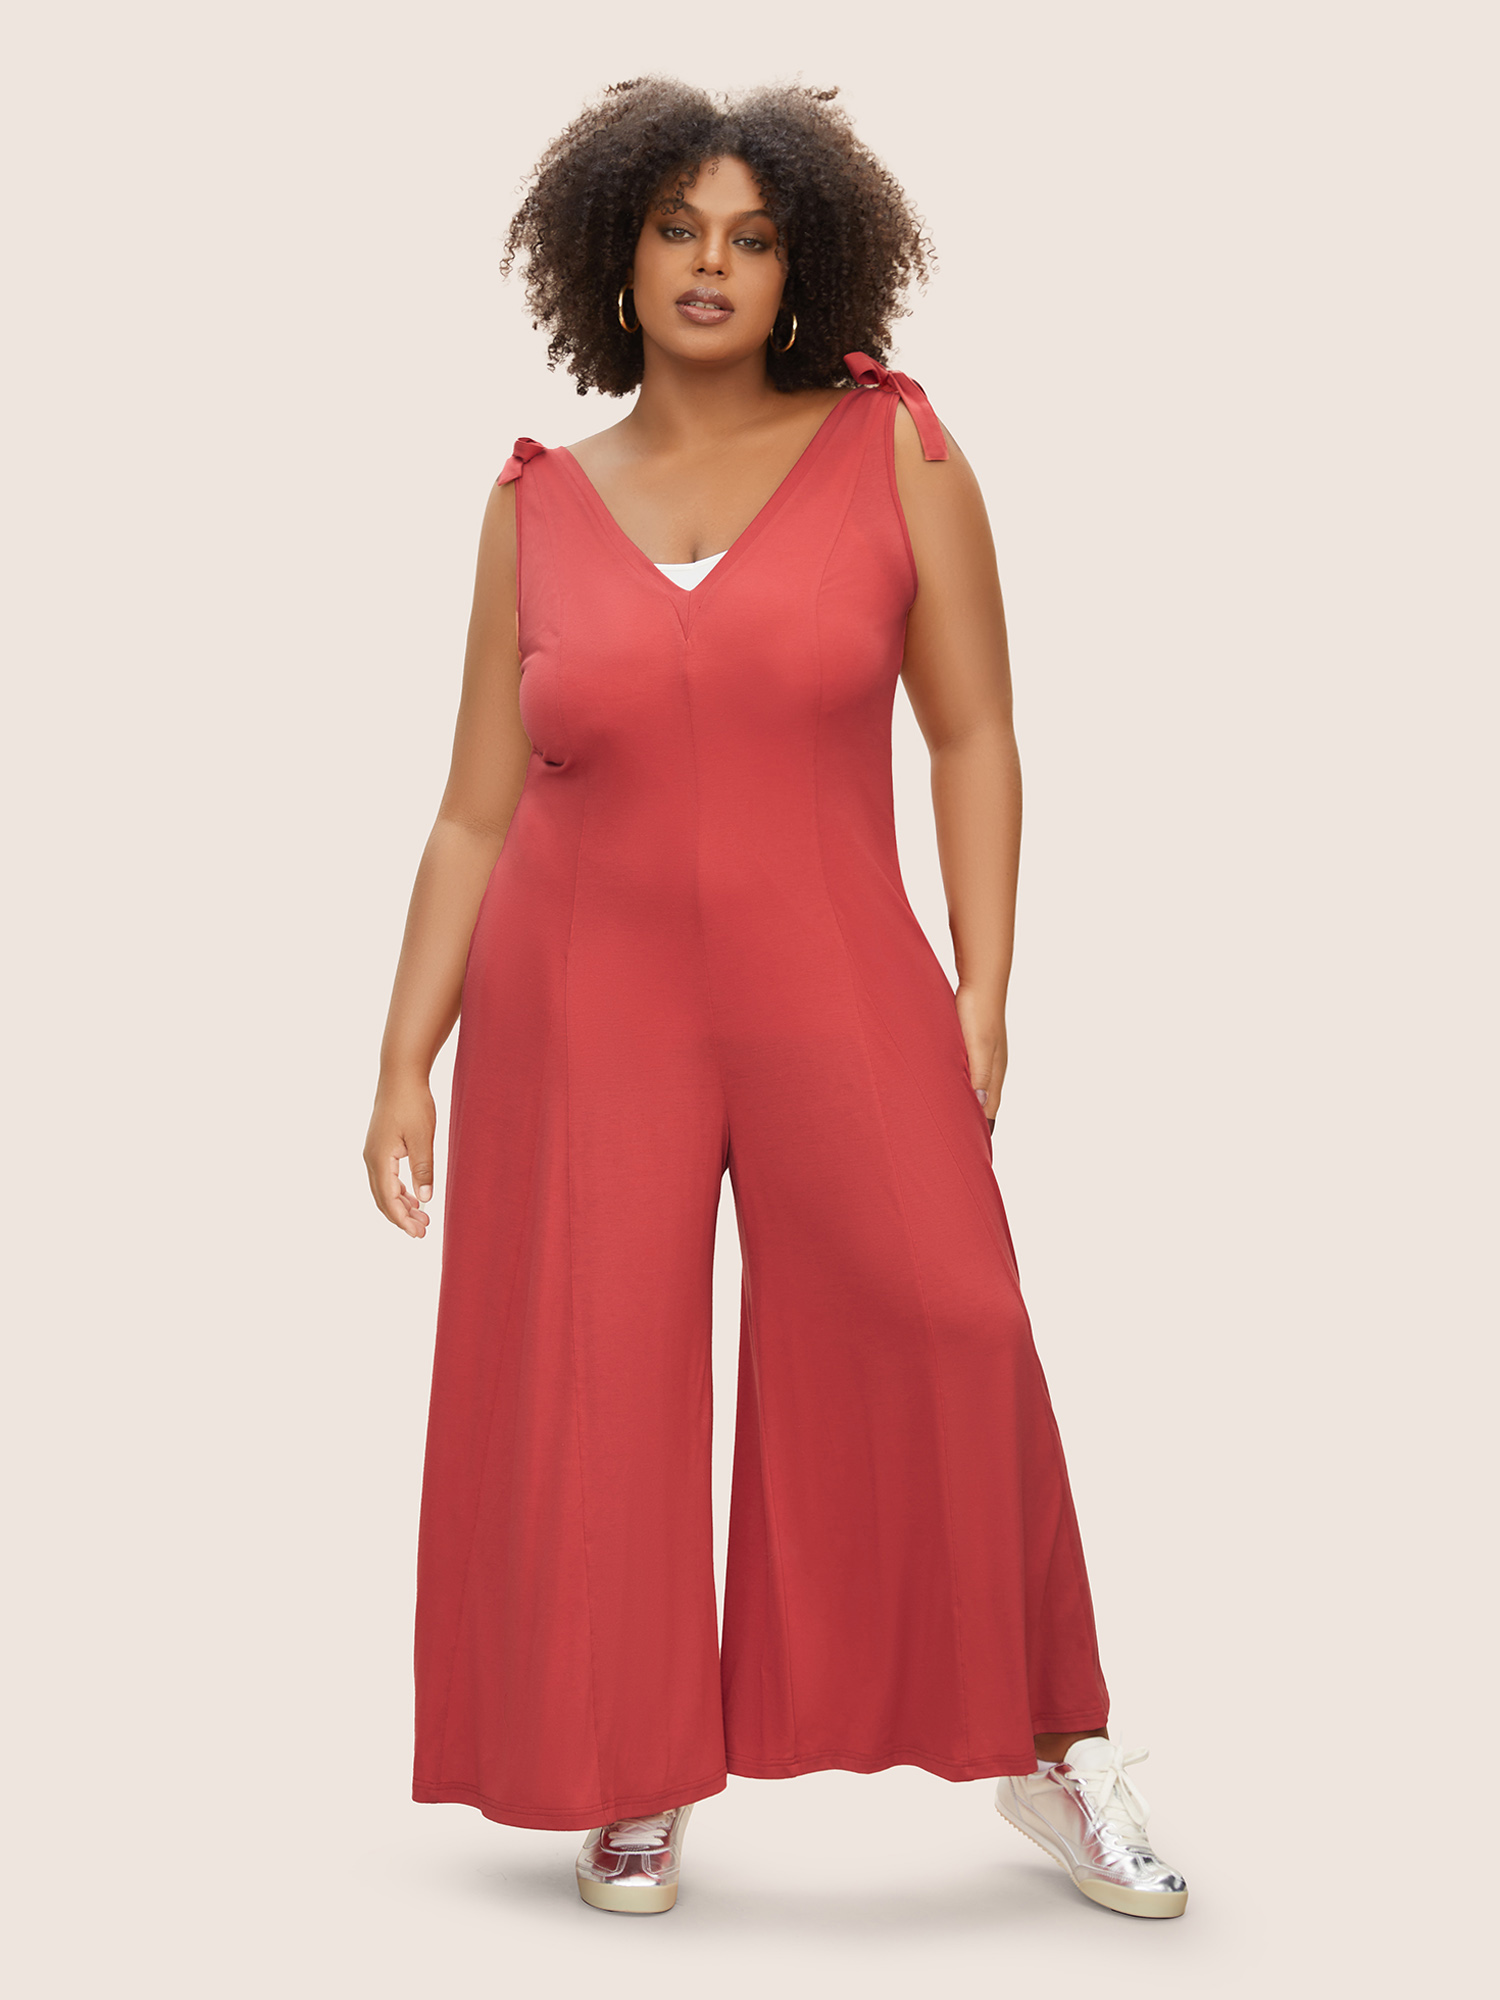 

Plus Size OrangeRed Supersoft Essentials V Neck Solid Tie Knot Jumpsuit Women Casual Sleeveless V-neck Everyday Loose Jumpsuits BloomChic